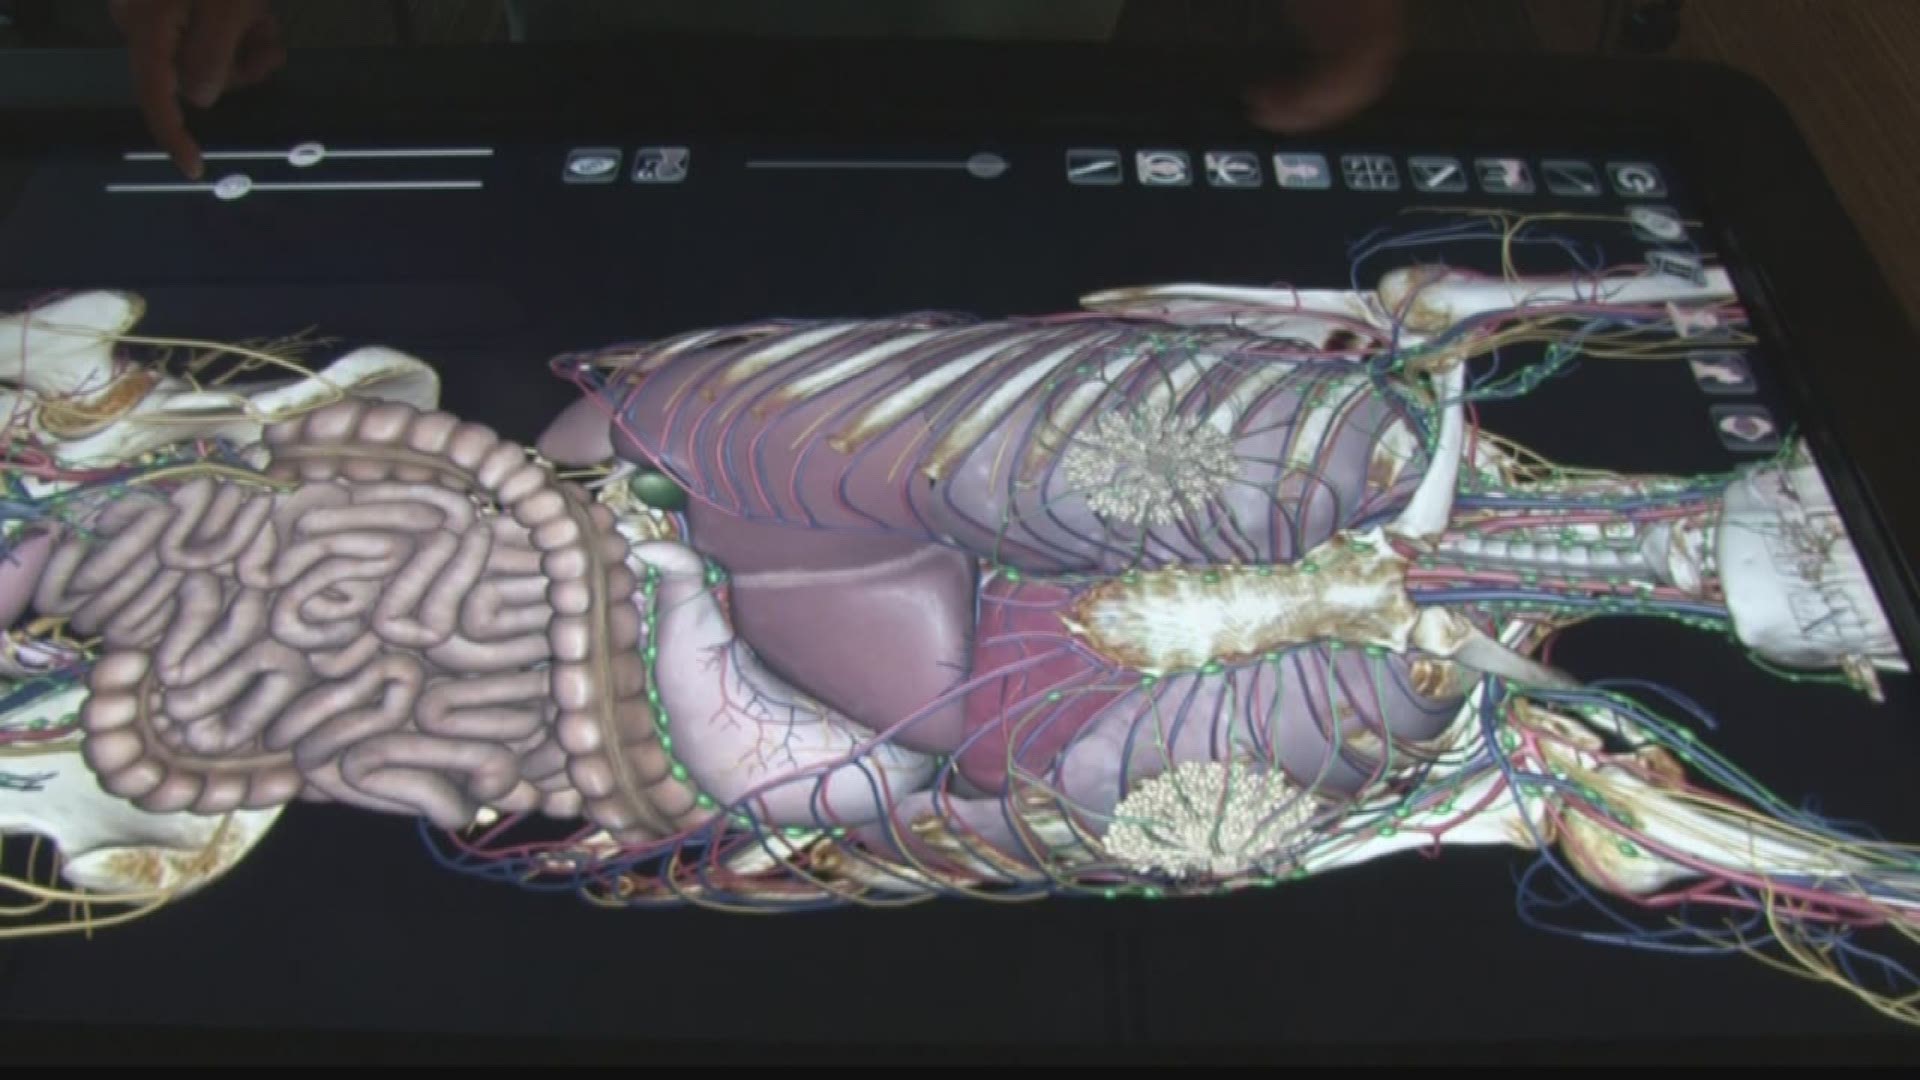 It's a virtual examination table called "anatomage" which is short for "anatomy image."